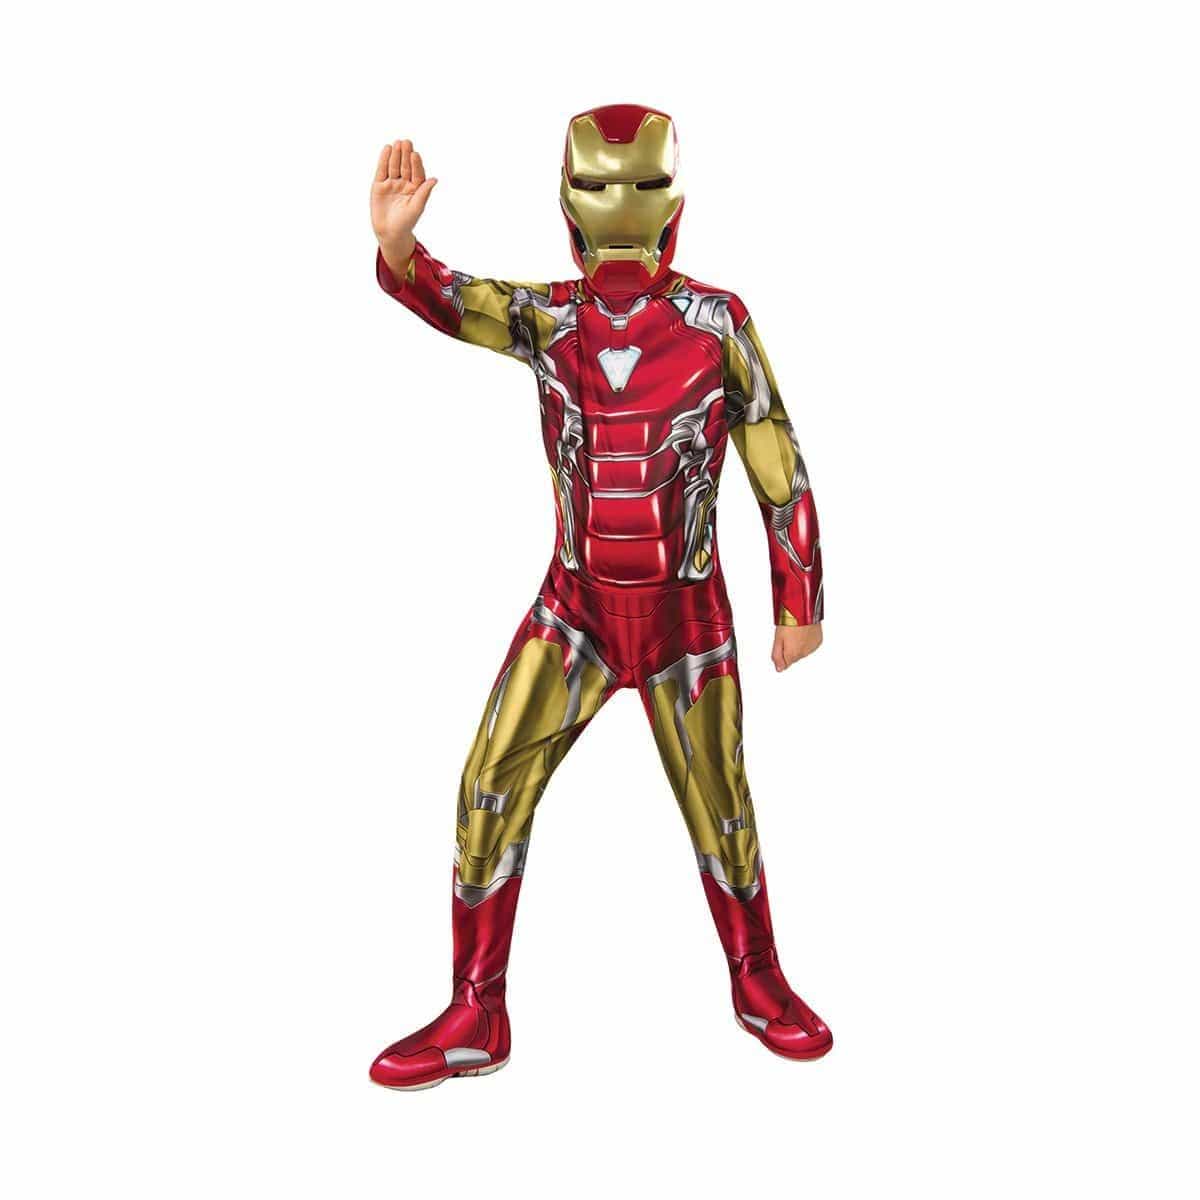 Buy Costumes Iron Man Costume for Kids, Avengers 4: Endgame sold at Party Expert